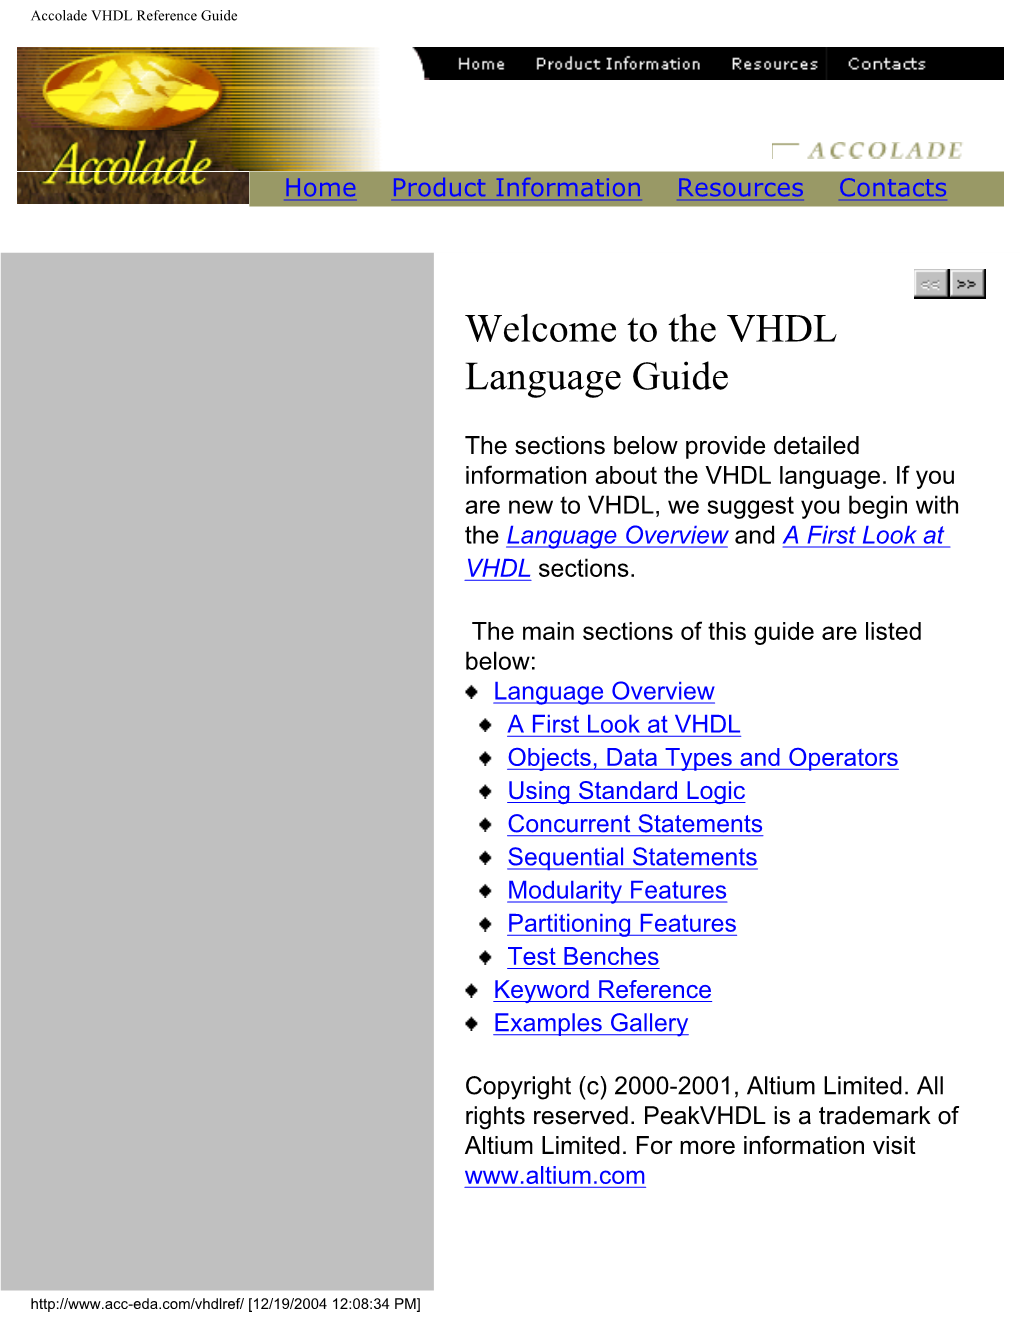 VHDL Language Guide (Accolade)